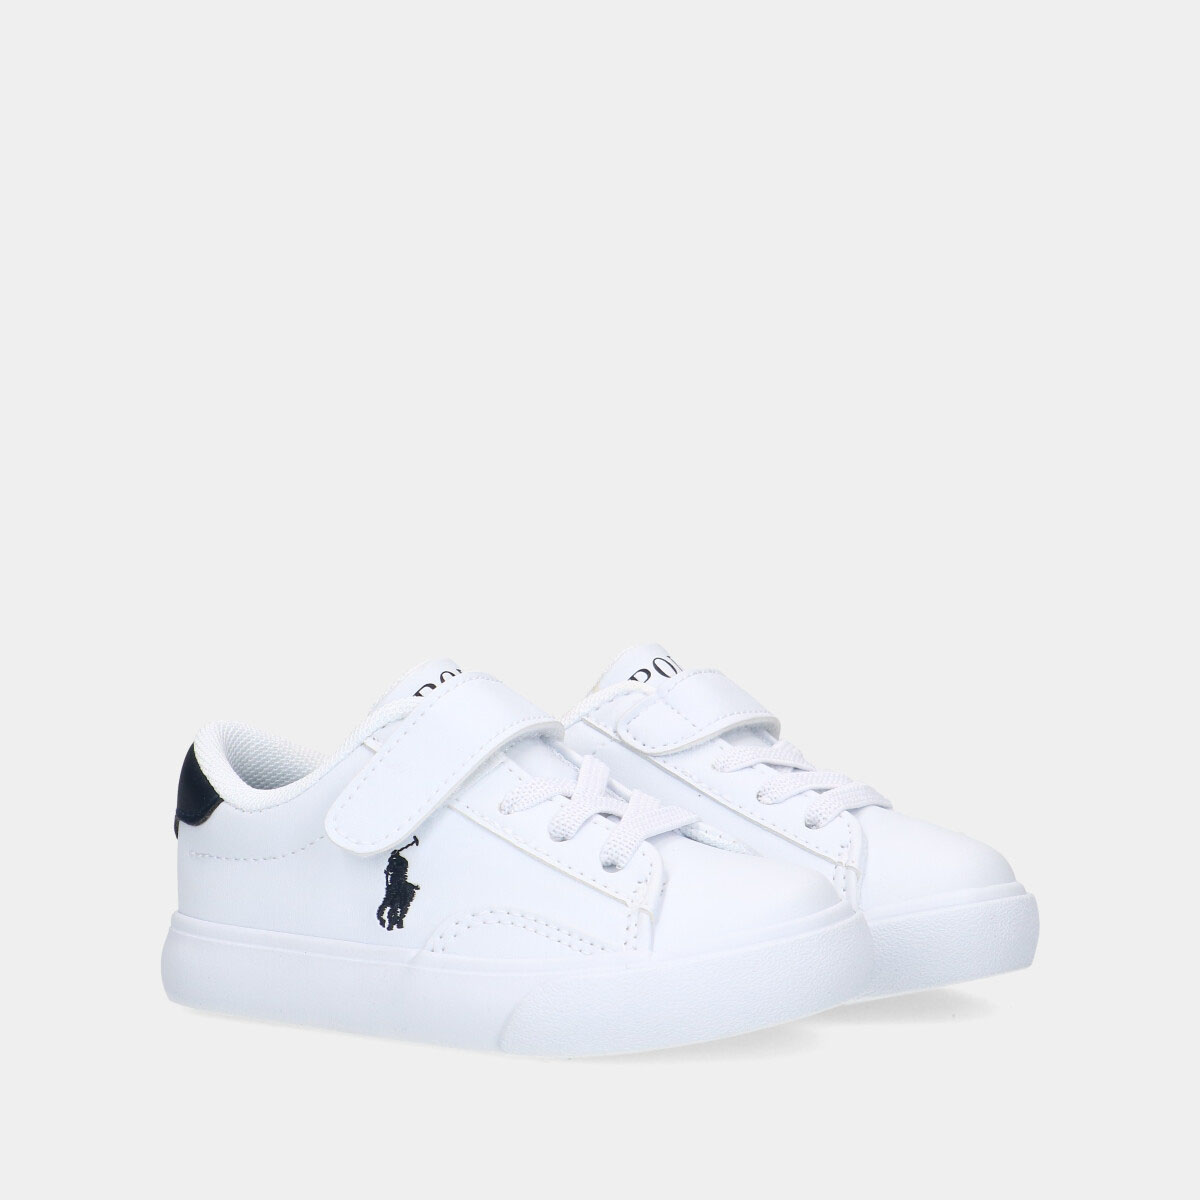 Polo Ralph Lauren Theron V PS White / Navy peuter sneakers
